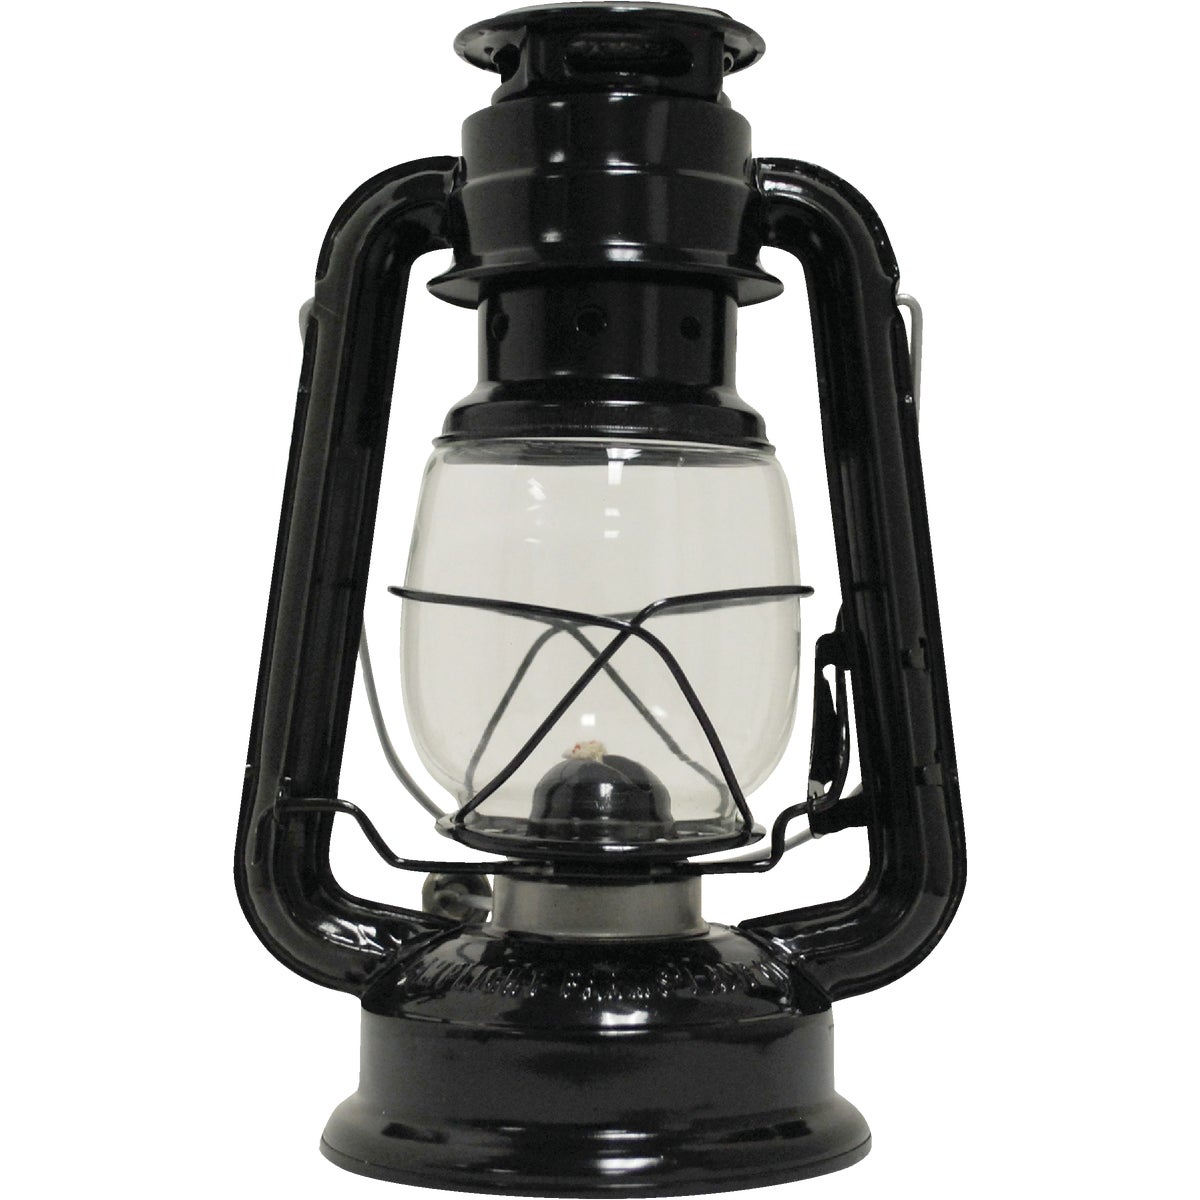 Item 603182, Black metal farmer style lantern burns up to 15 hours and holds 5 ounces of